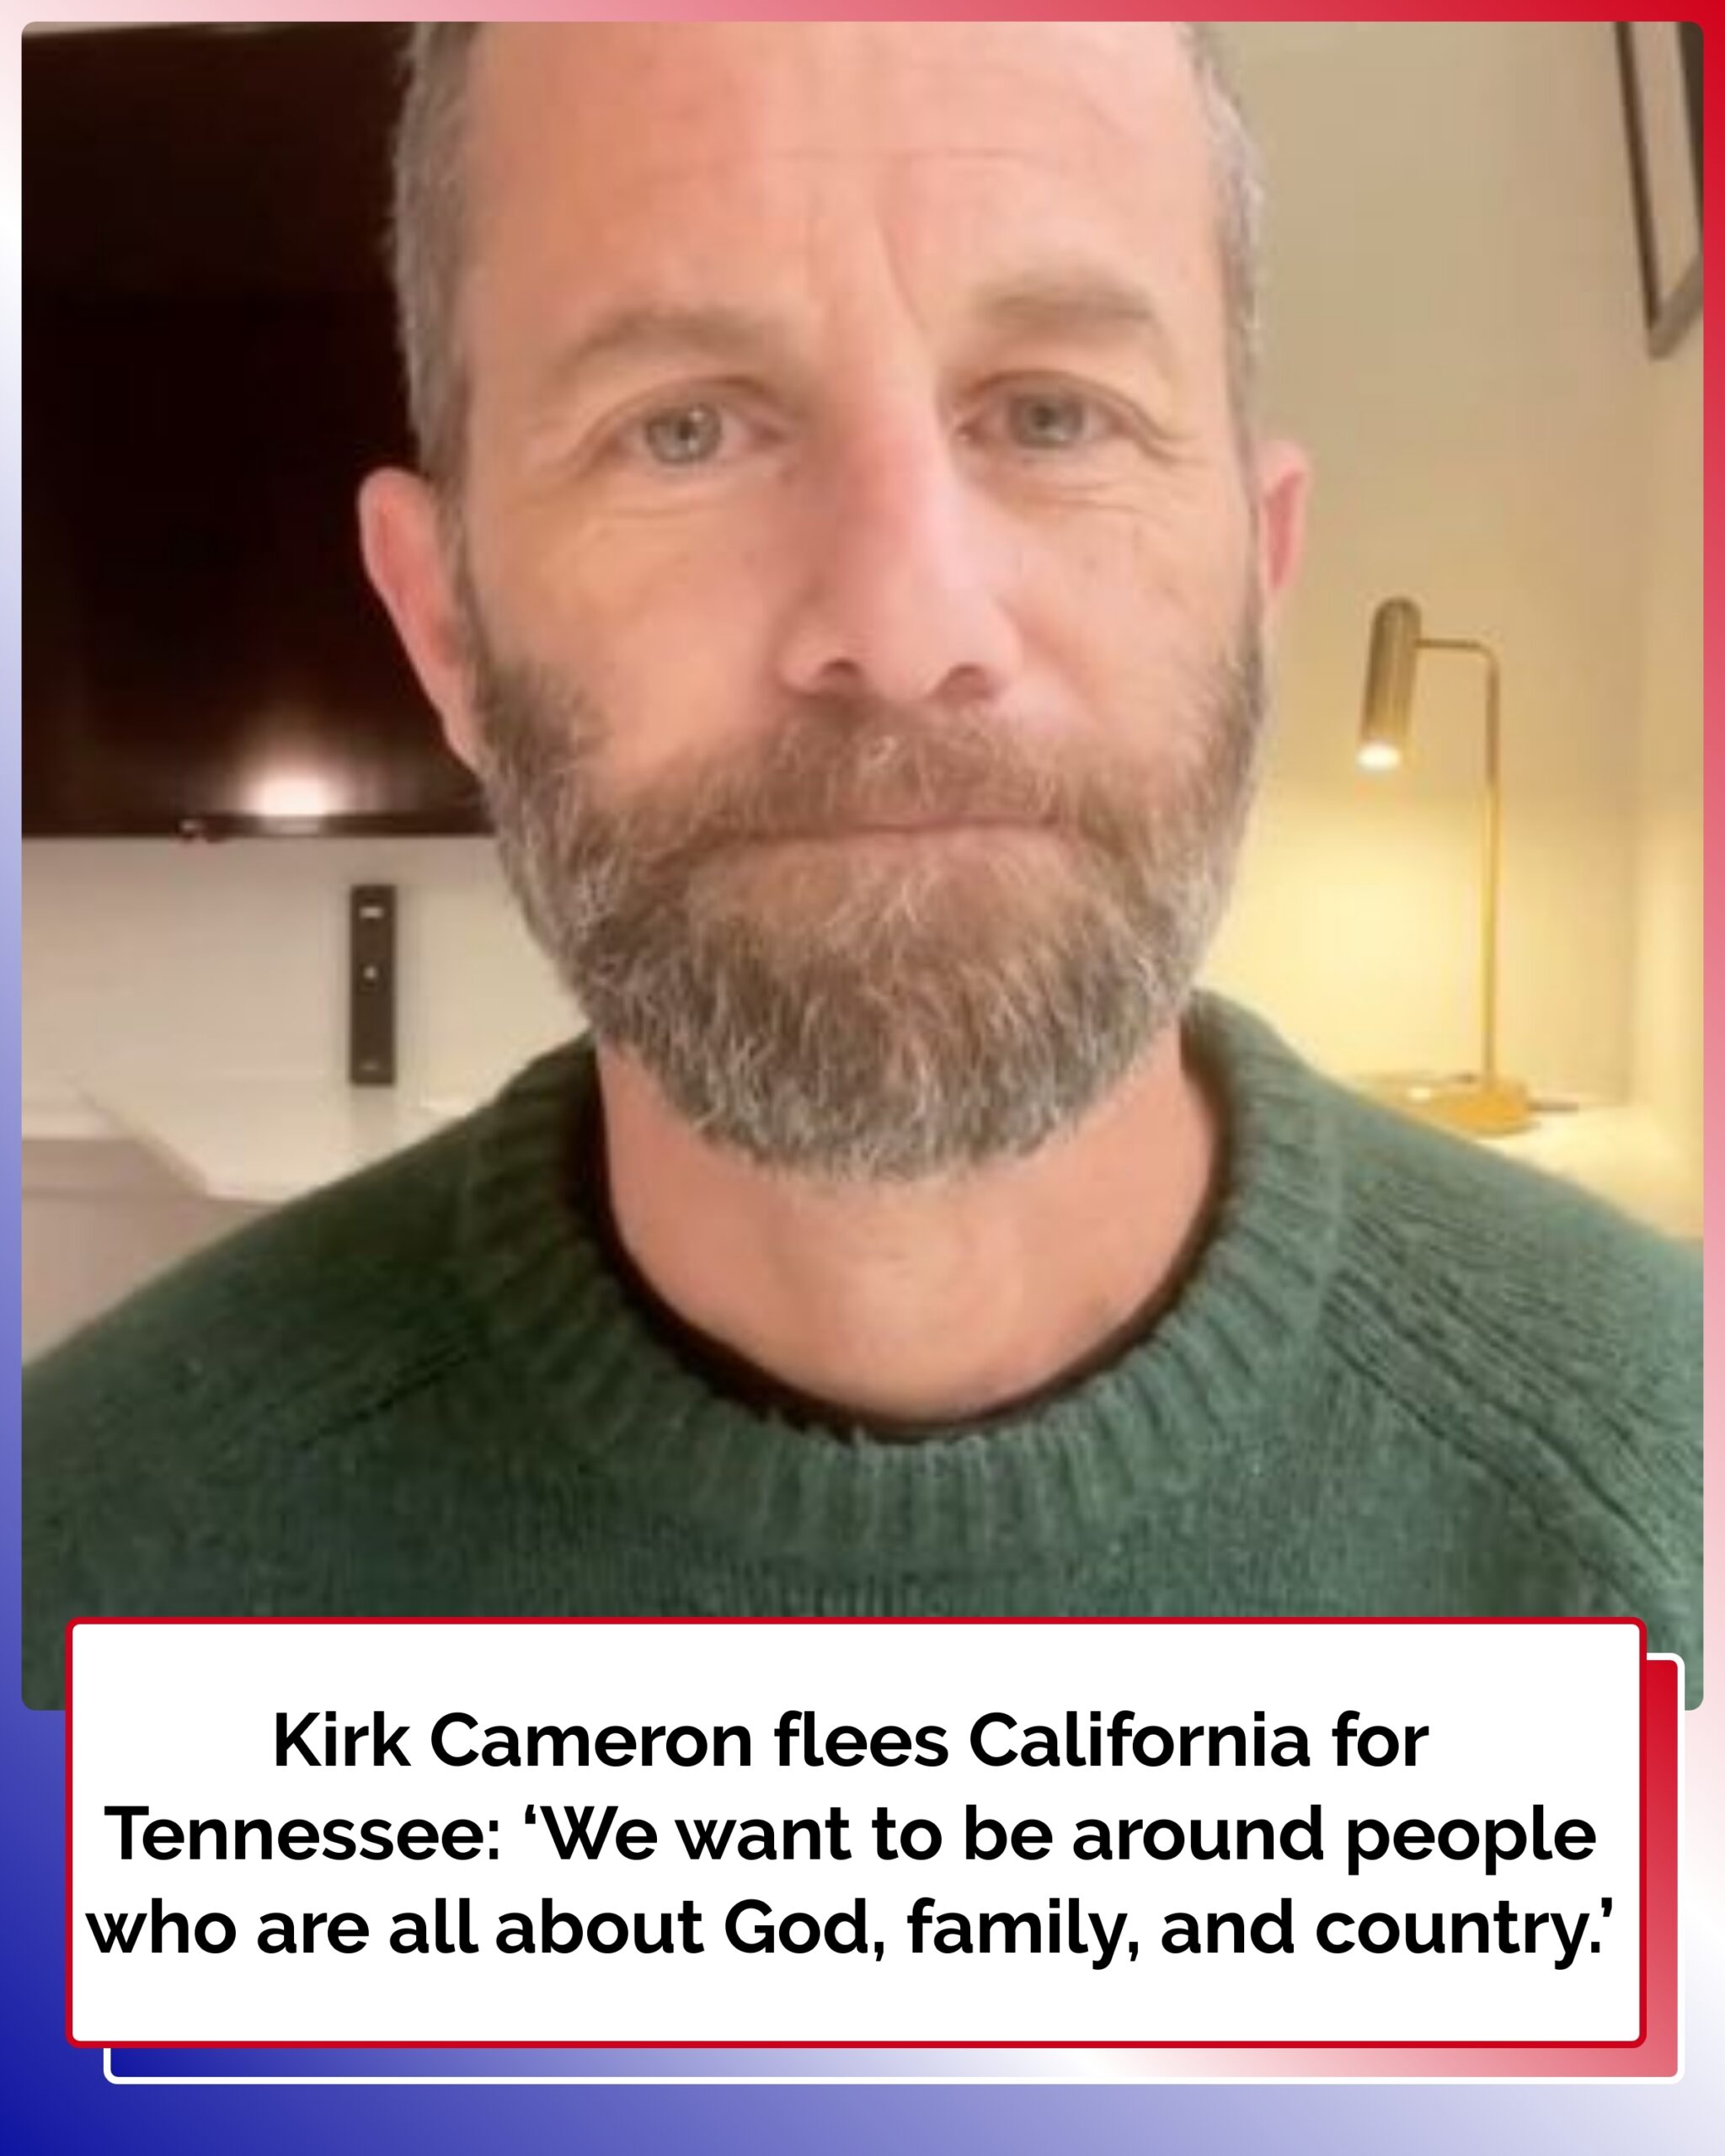 Kirk Cameron flees California for Tennessee: ‘We don’t feel safe anymore’